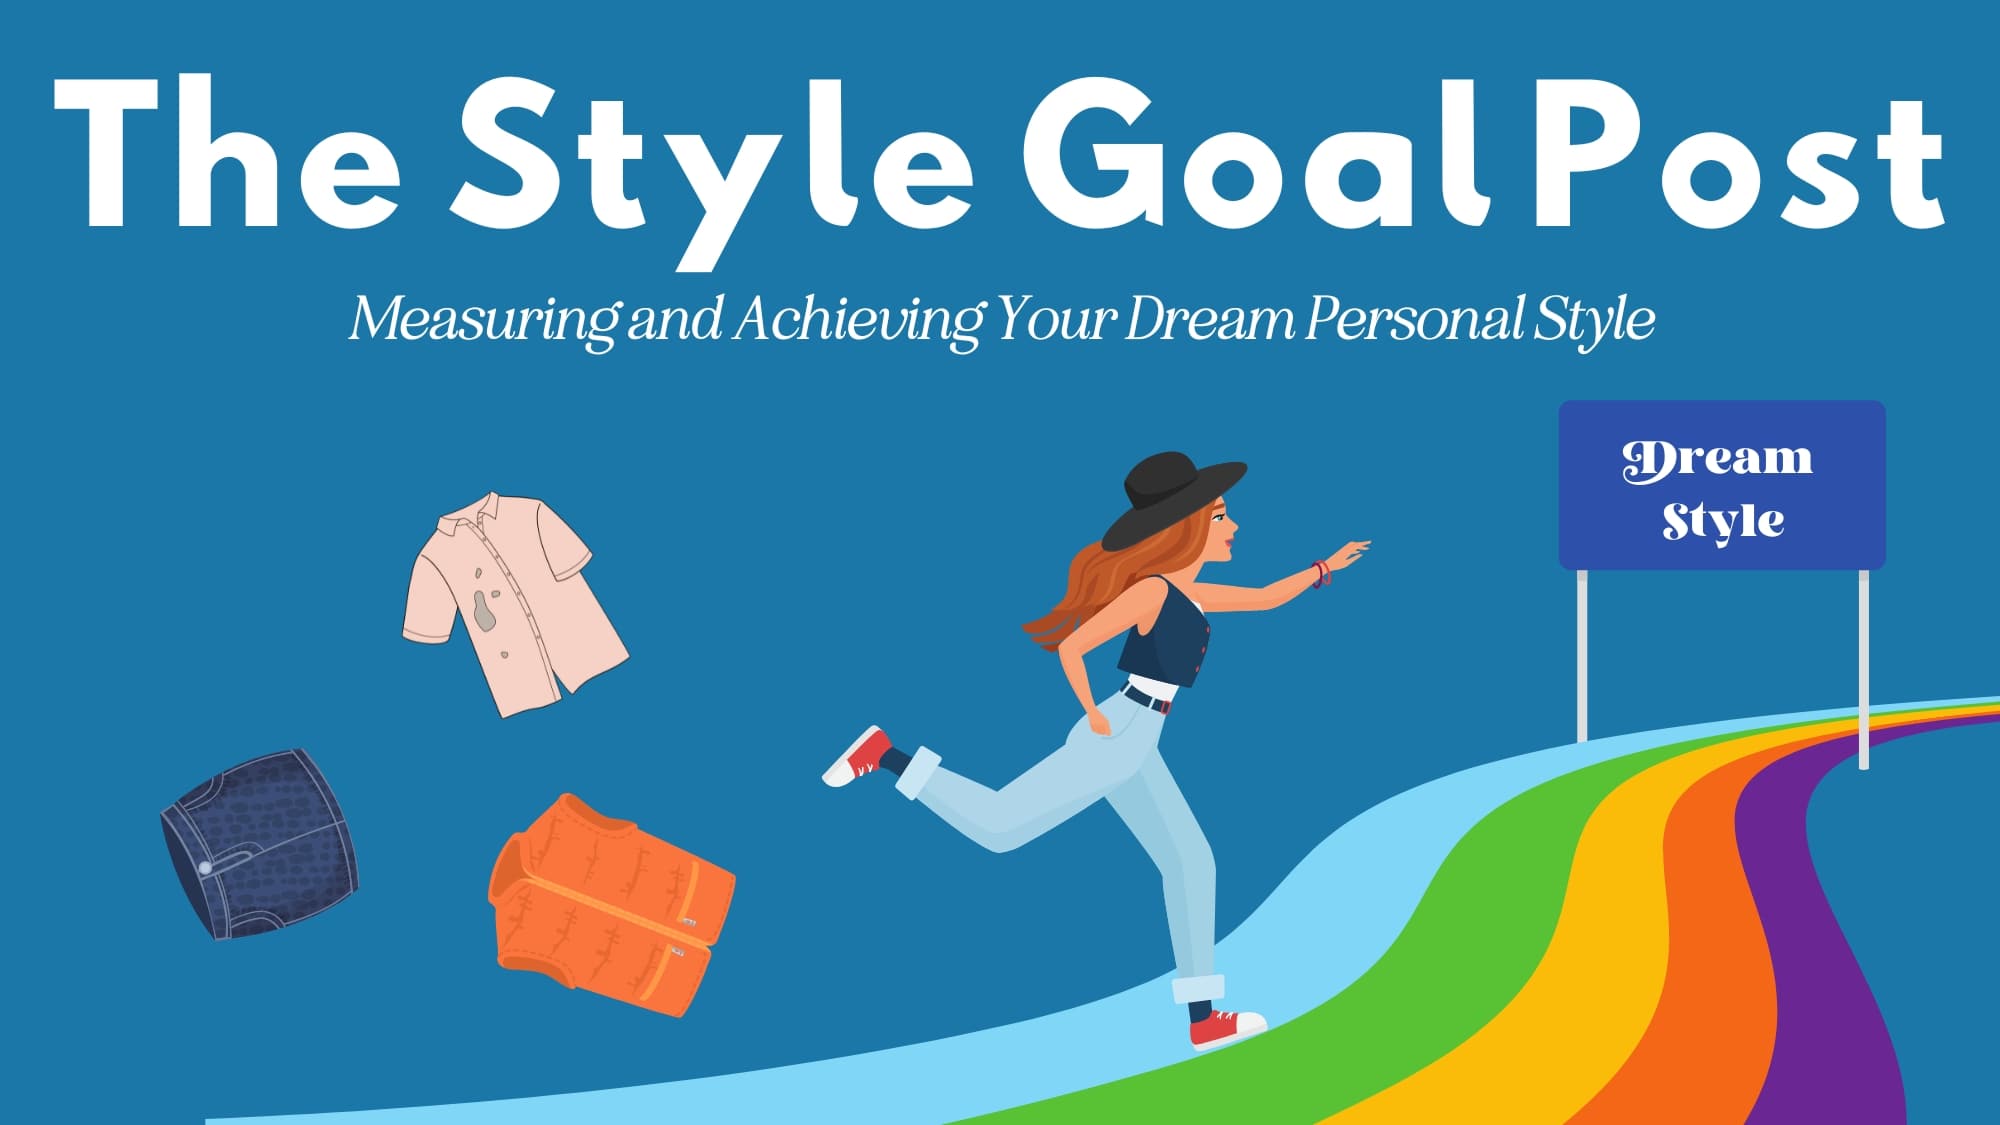 The Style Goal Post how to measure and achieve your dream personal style with woman running on track towards "dream style" finish line